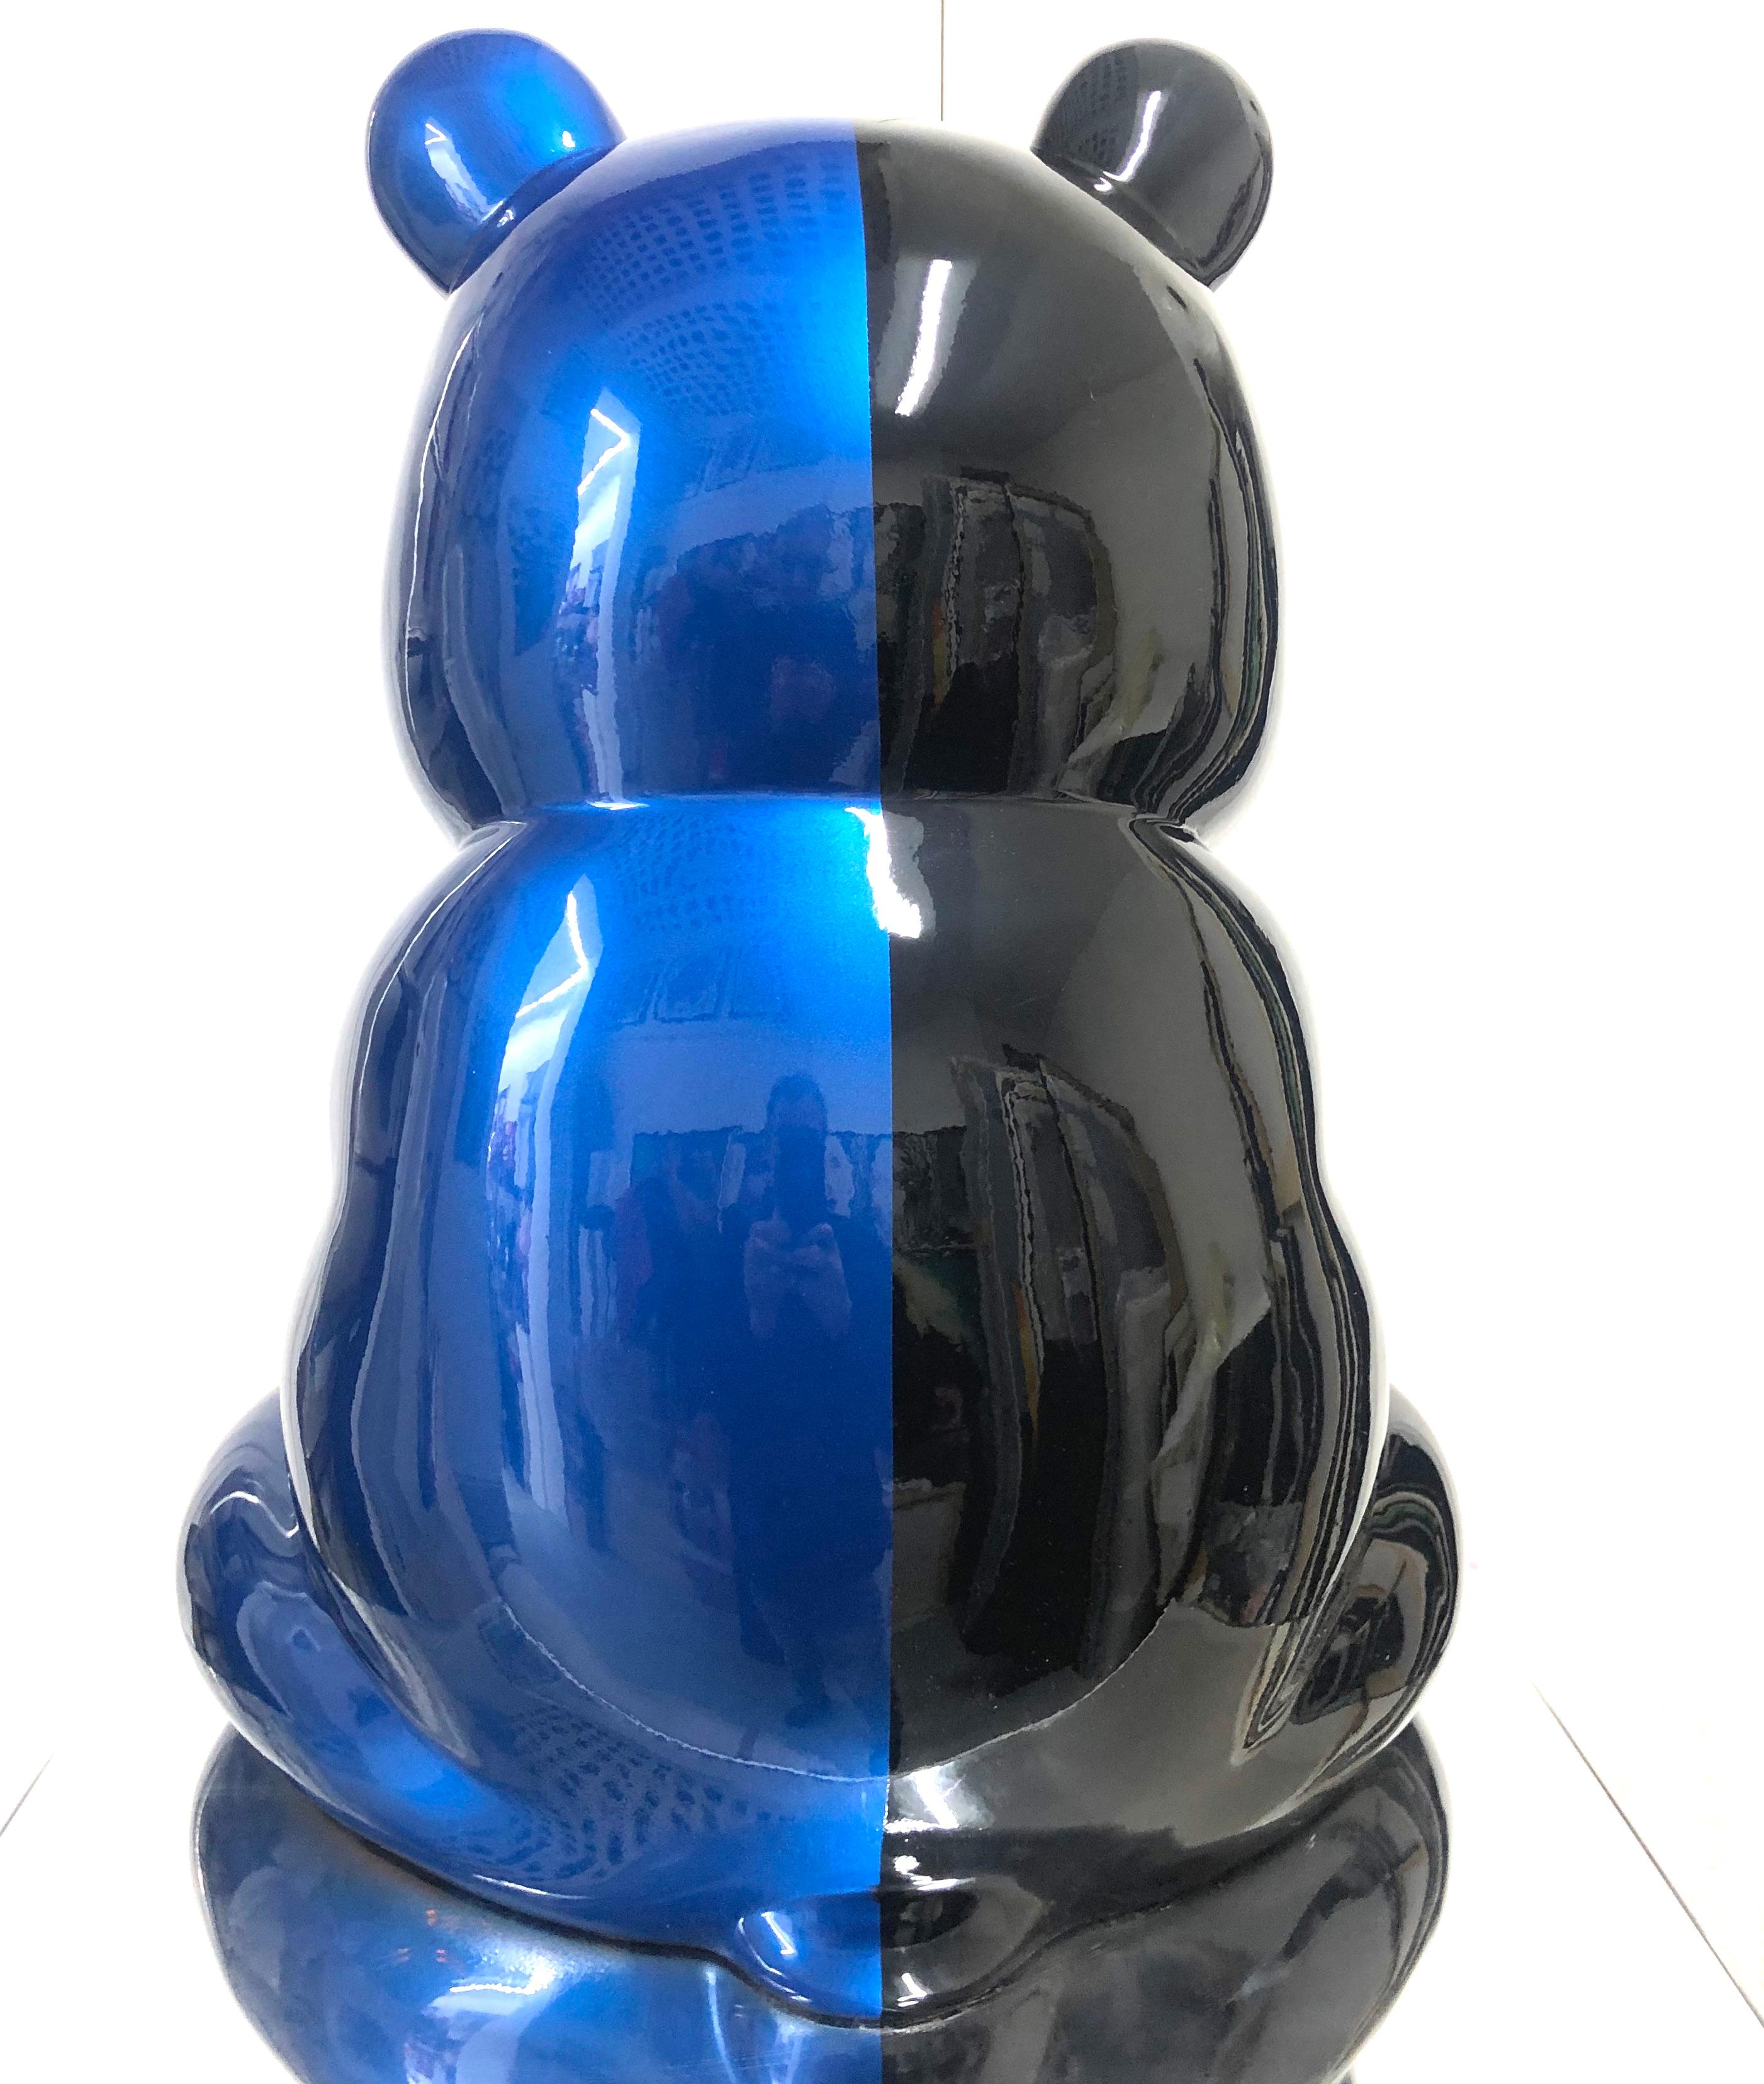 The United Pandasan  : Spectral Symmetry Black & Blu - Contemporary Sculpture by HIRO ANDO